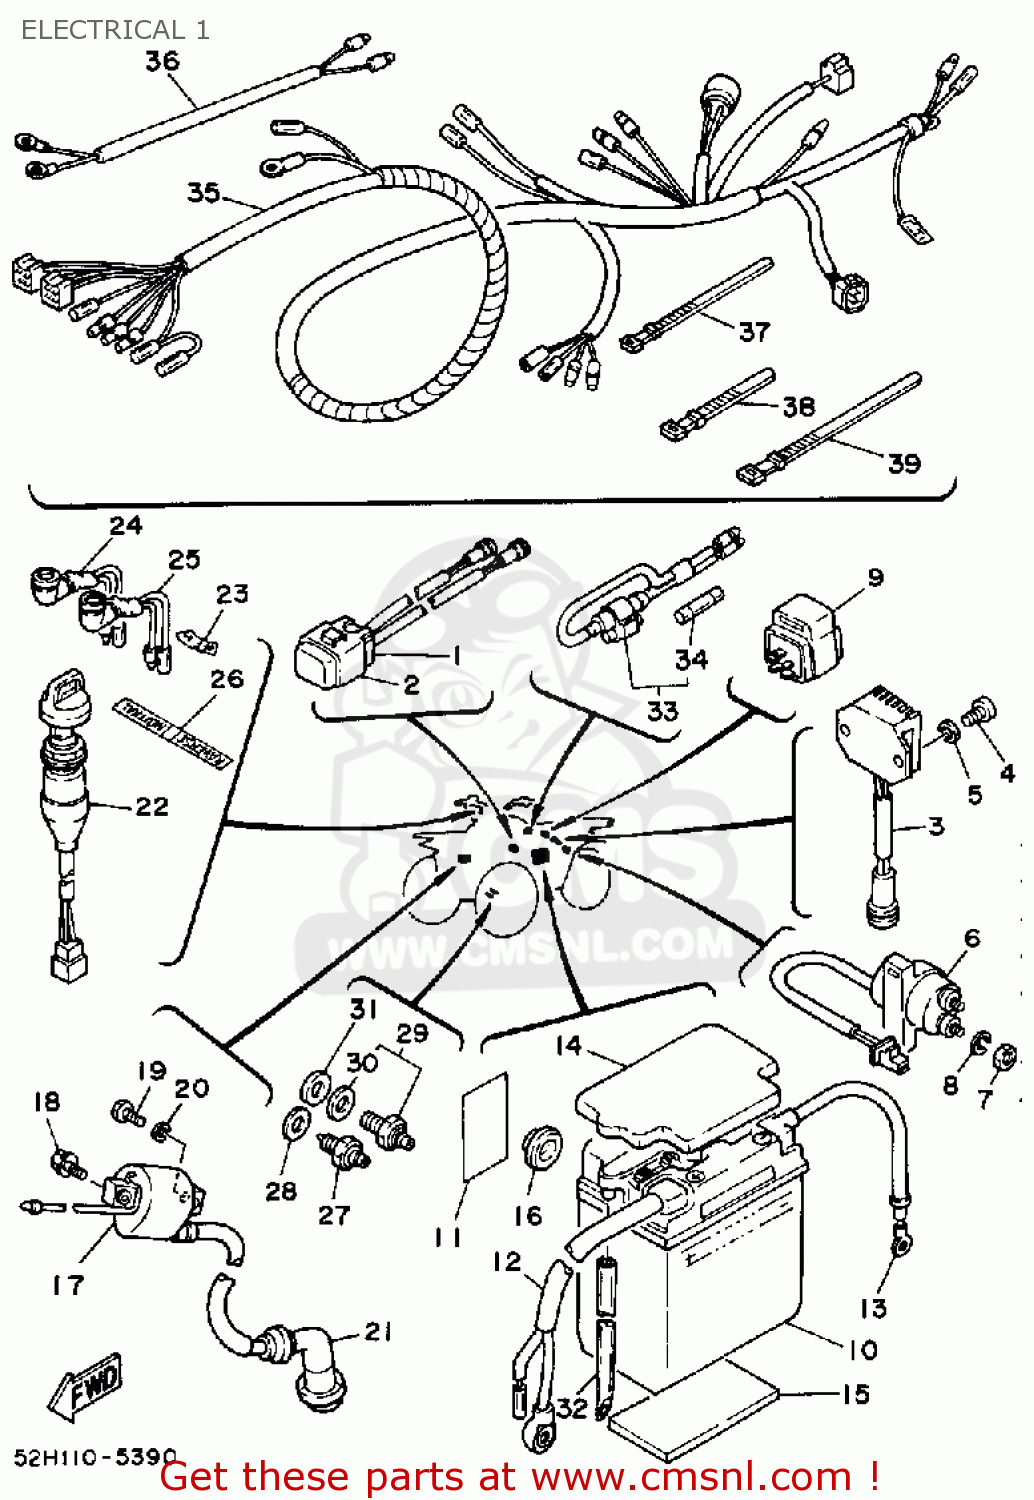 General info needed on the YFM200 moto4 - ATVConnection.com ATV Enthusiast  Community Universal Turn Signal Switch Wiring Diagram ATV Connection